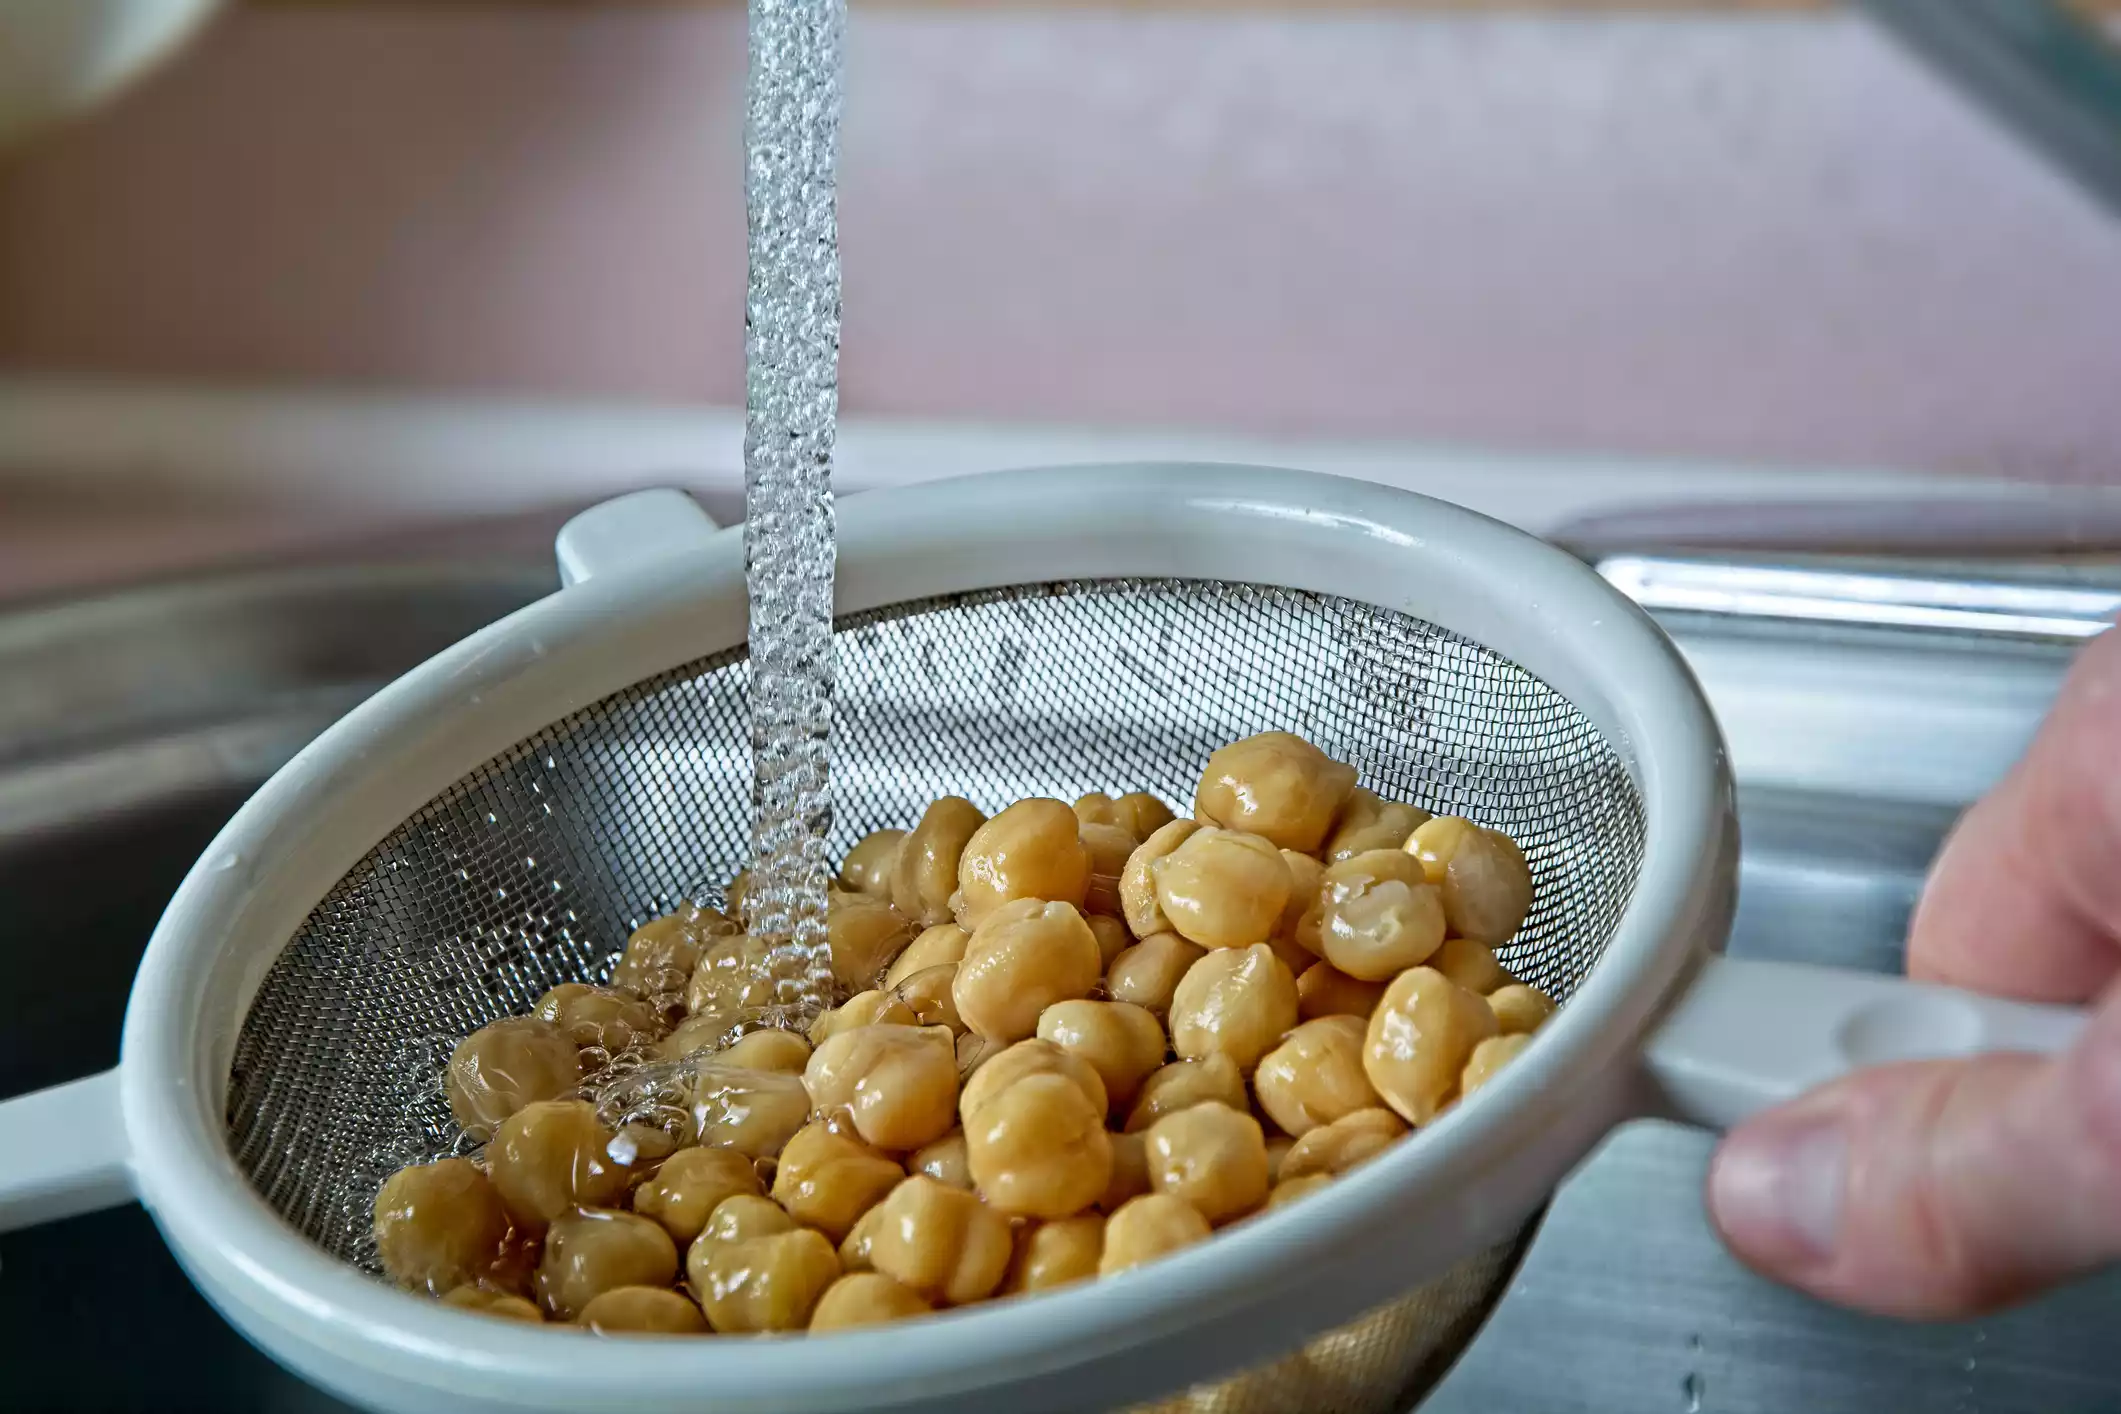 Rinsing chickpeas in the sink